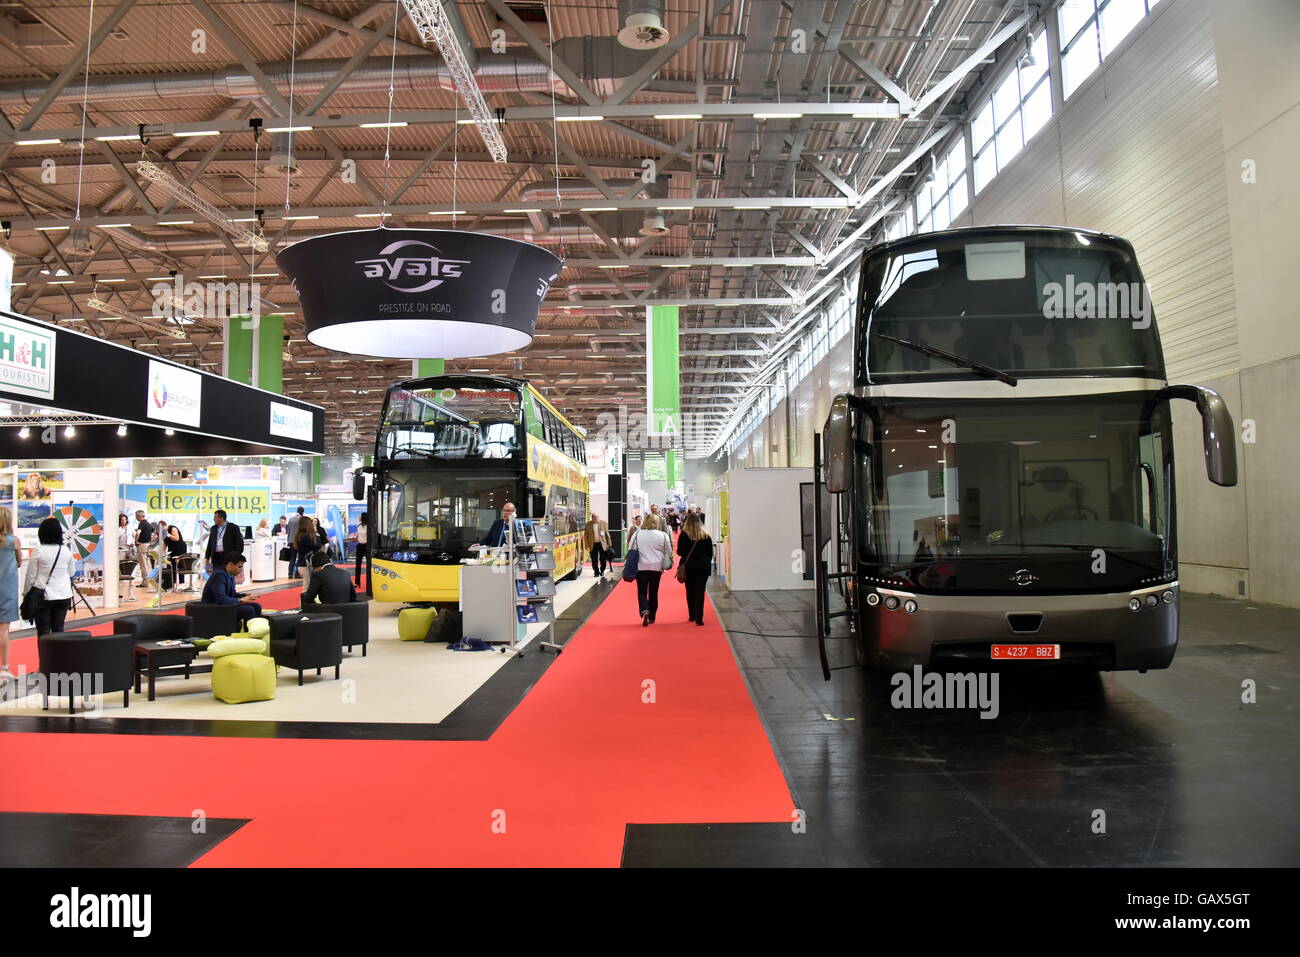 An Ayats Eclipse bus made by Spanish coach manufacturer Carrocerias Ayats SA seen at the RDA Workshop, an international trade fair for travel coach tourism and group tours, in Cologne, Germany, 06 July 2016. Photo: Horst Galuschka/dpa - NO WIRE SERVICE - Stock Photo